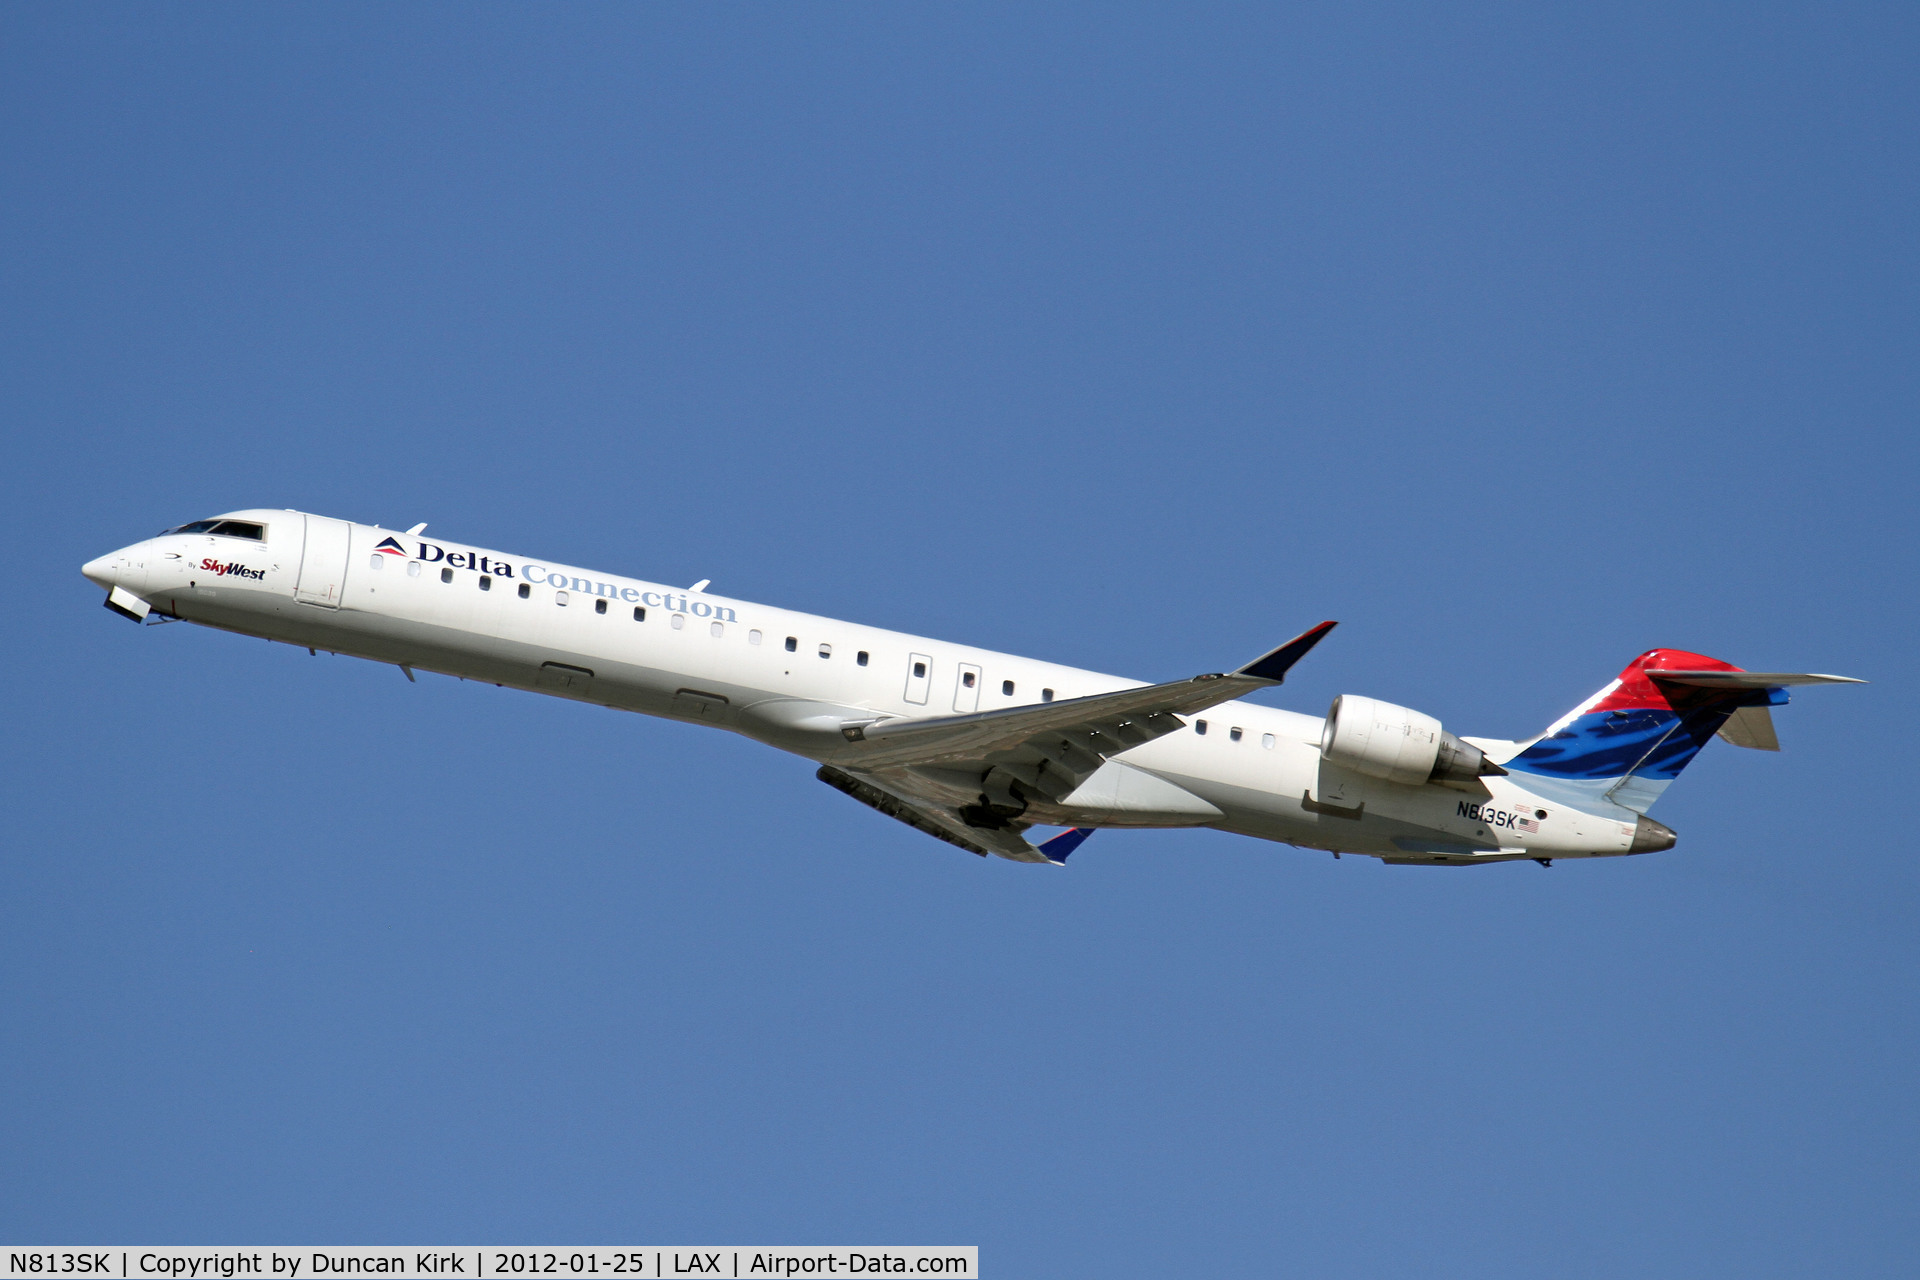 N813SK, 2006 Canadair CL-600-2D24 Regional Jet CRJ-900 C/N 15099, One of a handfull of planes still wearing 'old' Delta colors